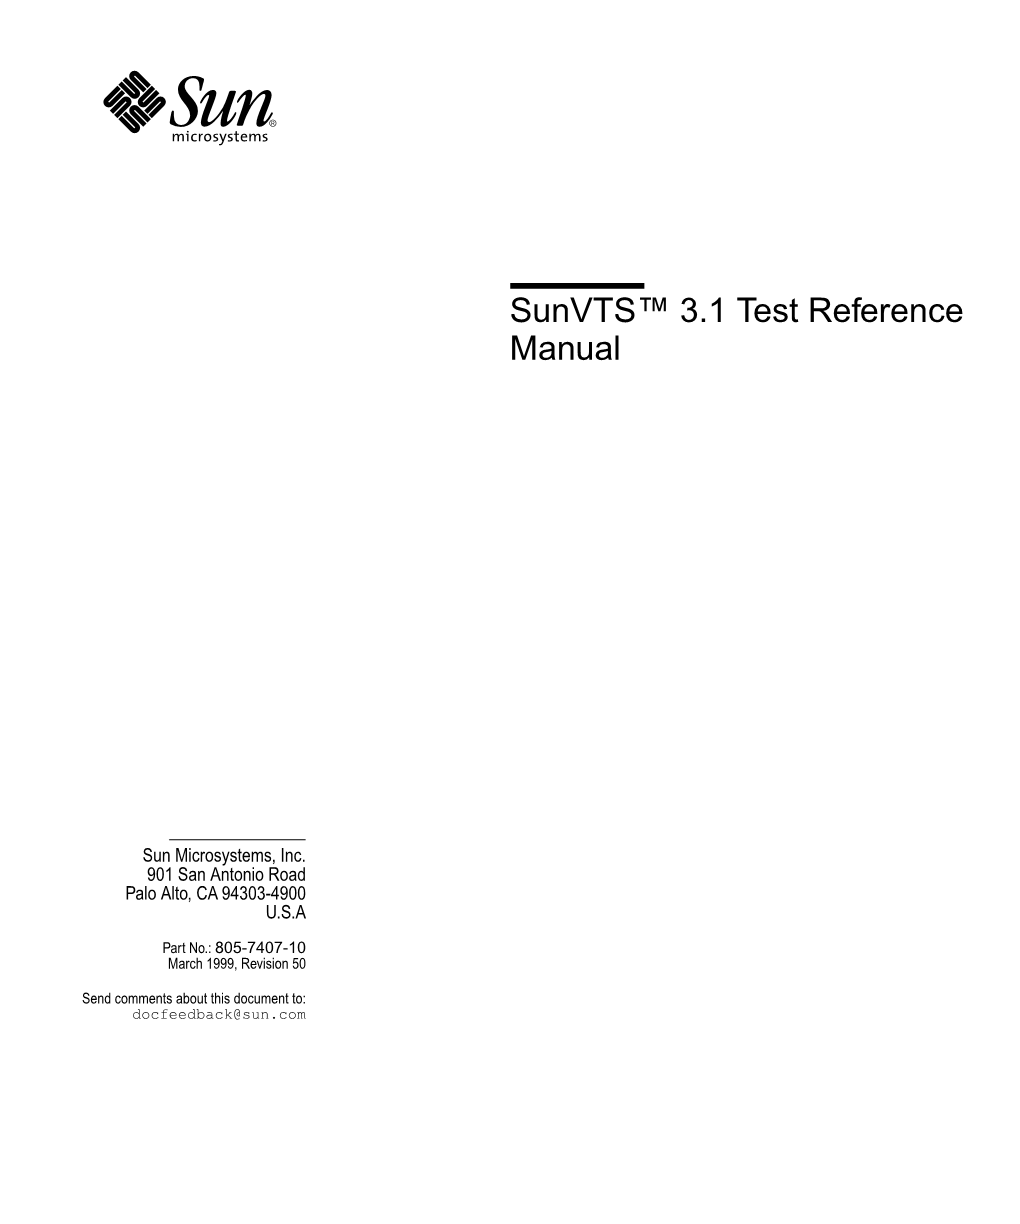 Sunvts 3.1 Test Reference Manual